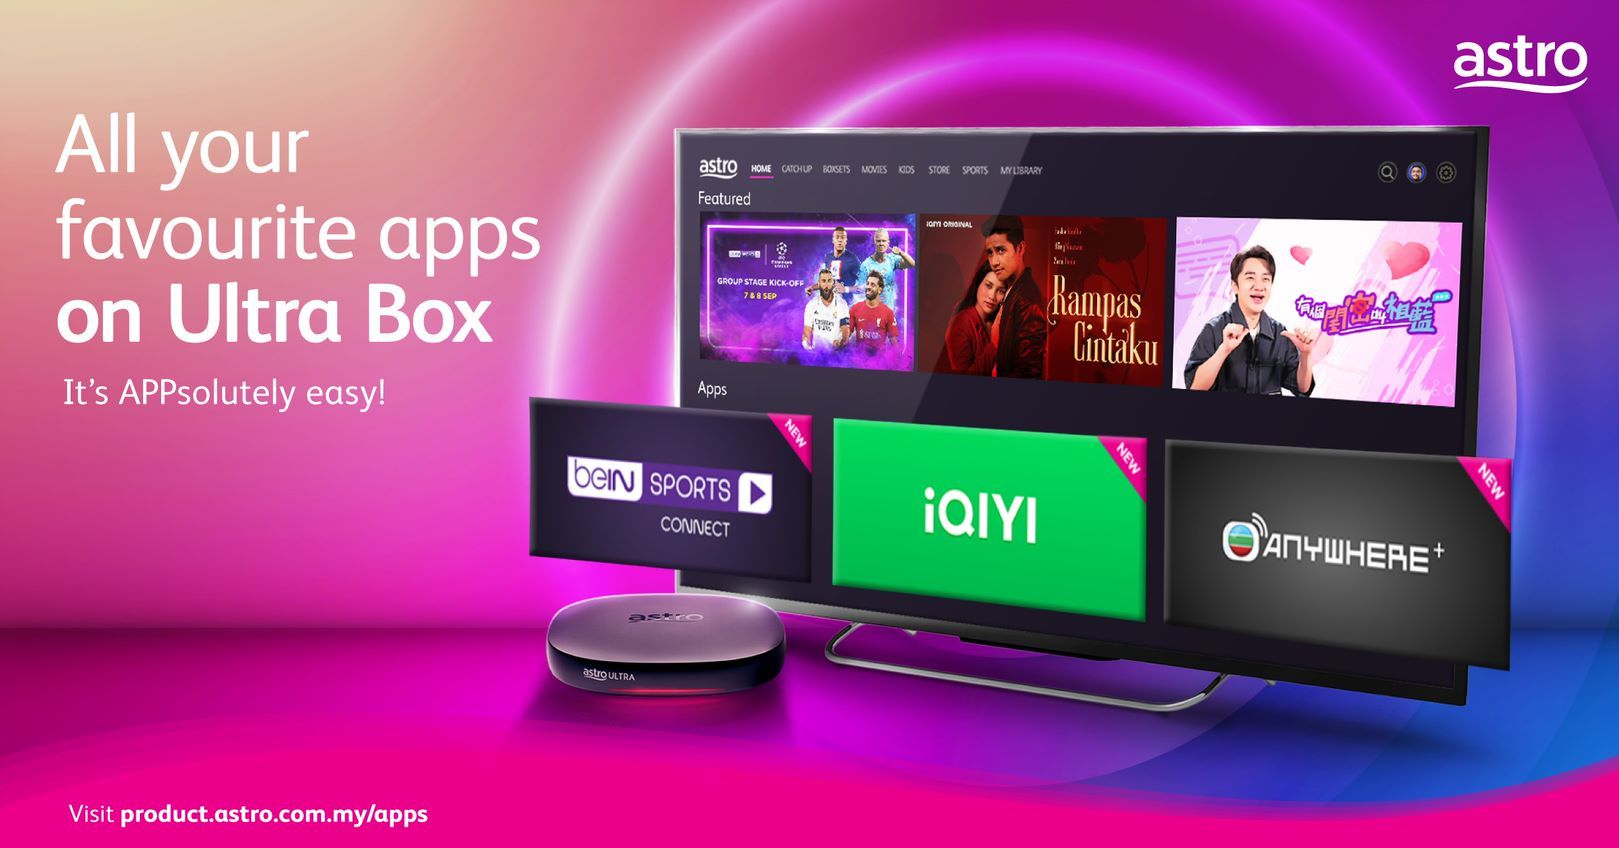 Astro customers can now watch BeIN Sports Connect, iQiyi and TVBAnywhere+ directly from the Astro Ultra Box